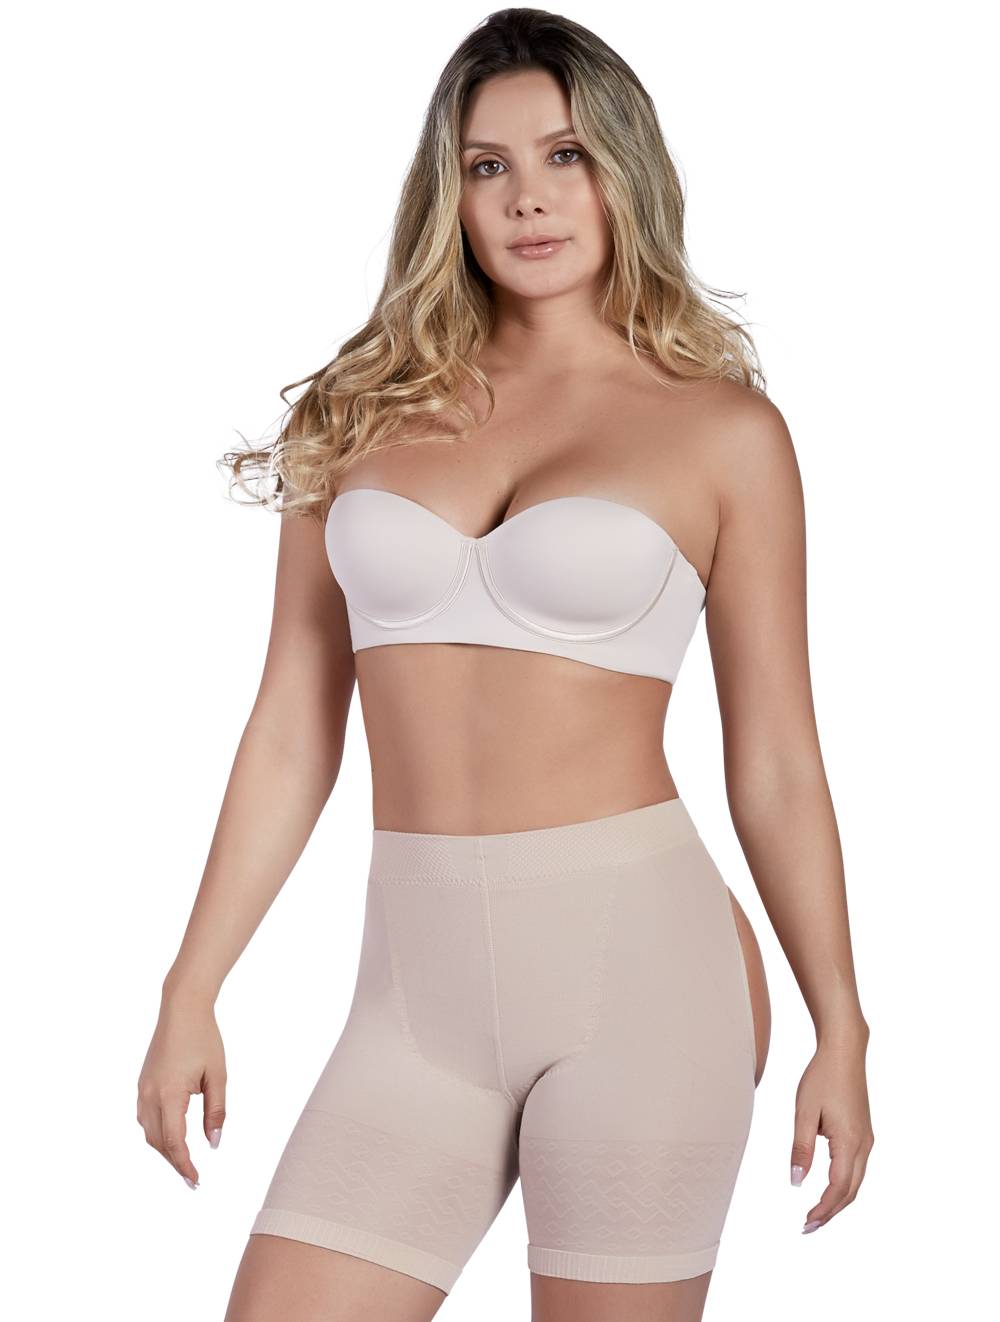 Final Sale Clearance Cysm Seamless Strapless Thermal Full Body